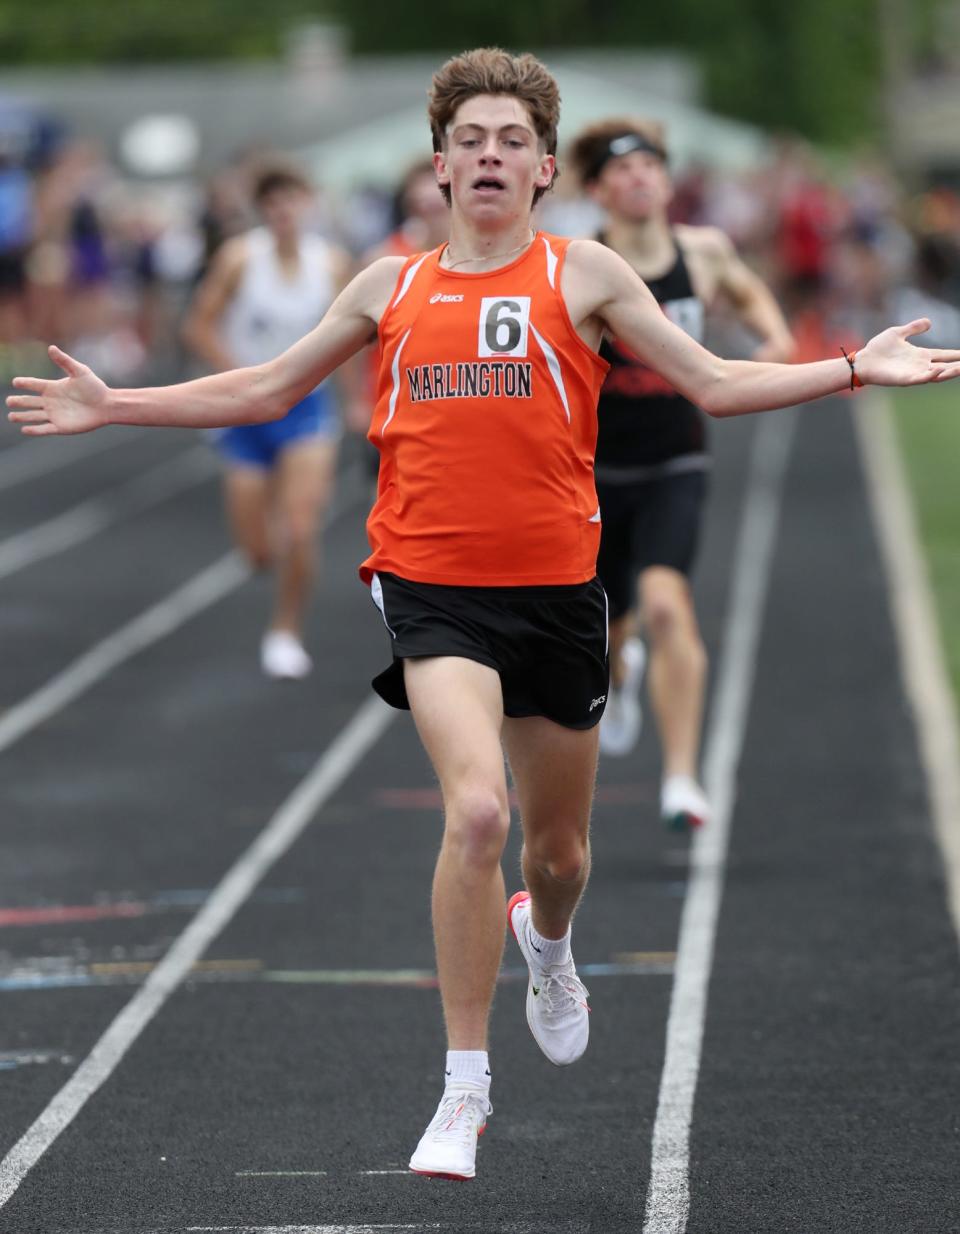 Marlington's Colin Cernansky reacts as he crosses the finish line to win the 1,600 meters in the Division II regional meet at Austintown Fitch High School on Saturday, May 28, 2022.